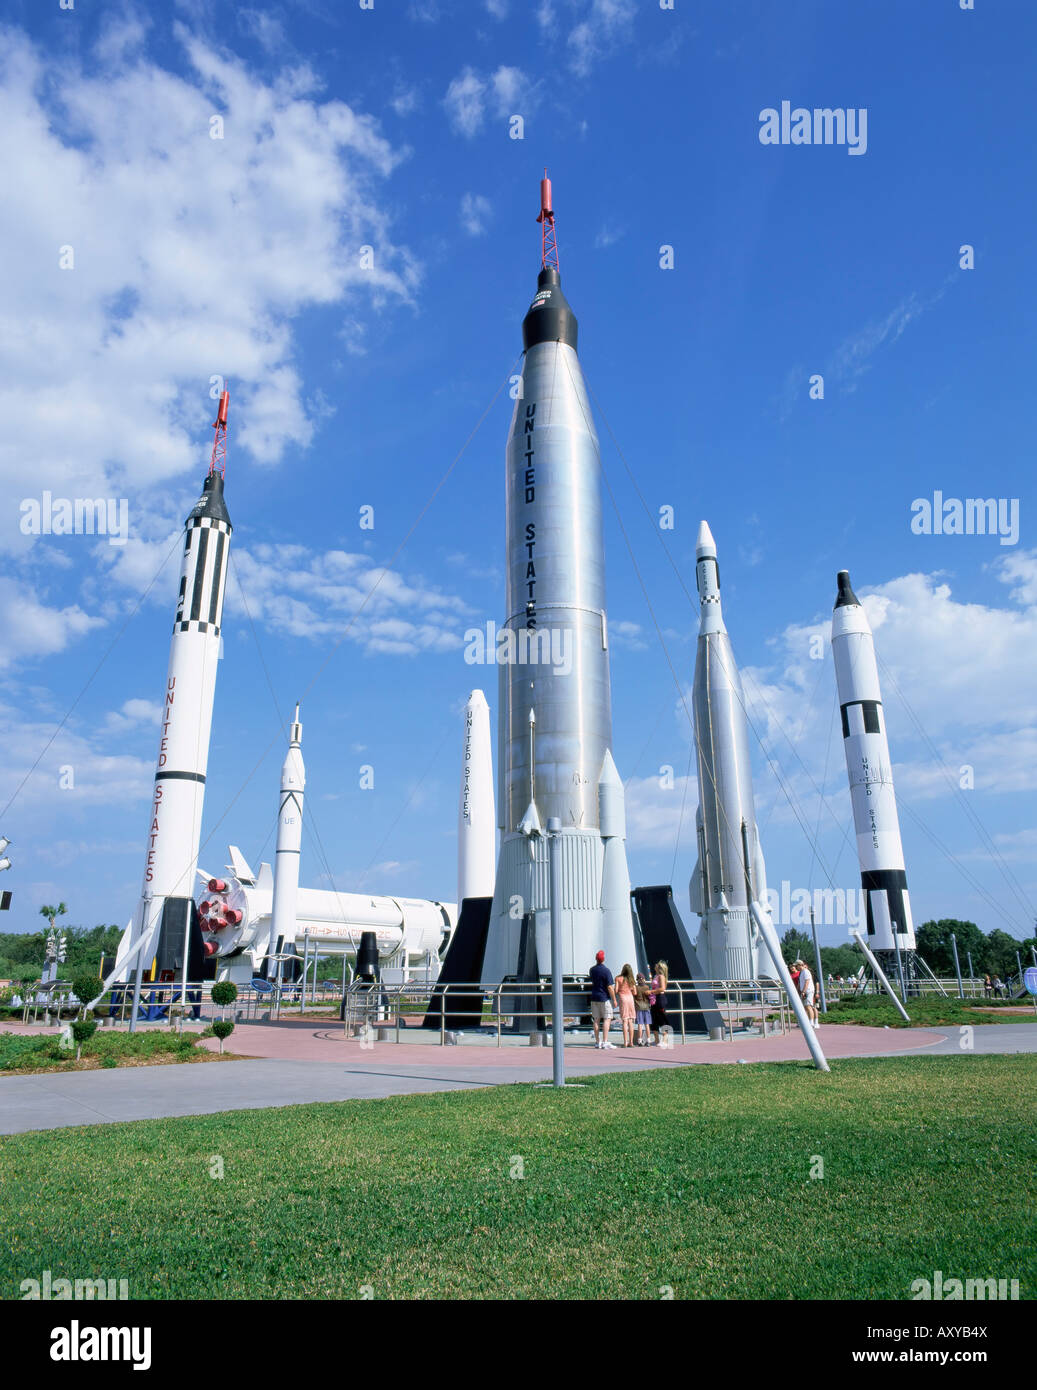 John F. Kennedy Space Center, Cape Canaveral, Florida, United States of America, North America Stock Photo